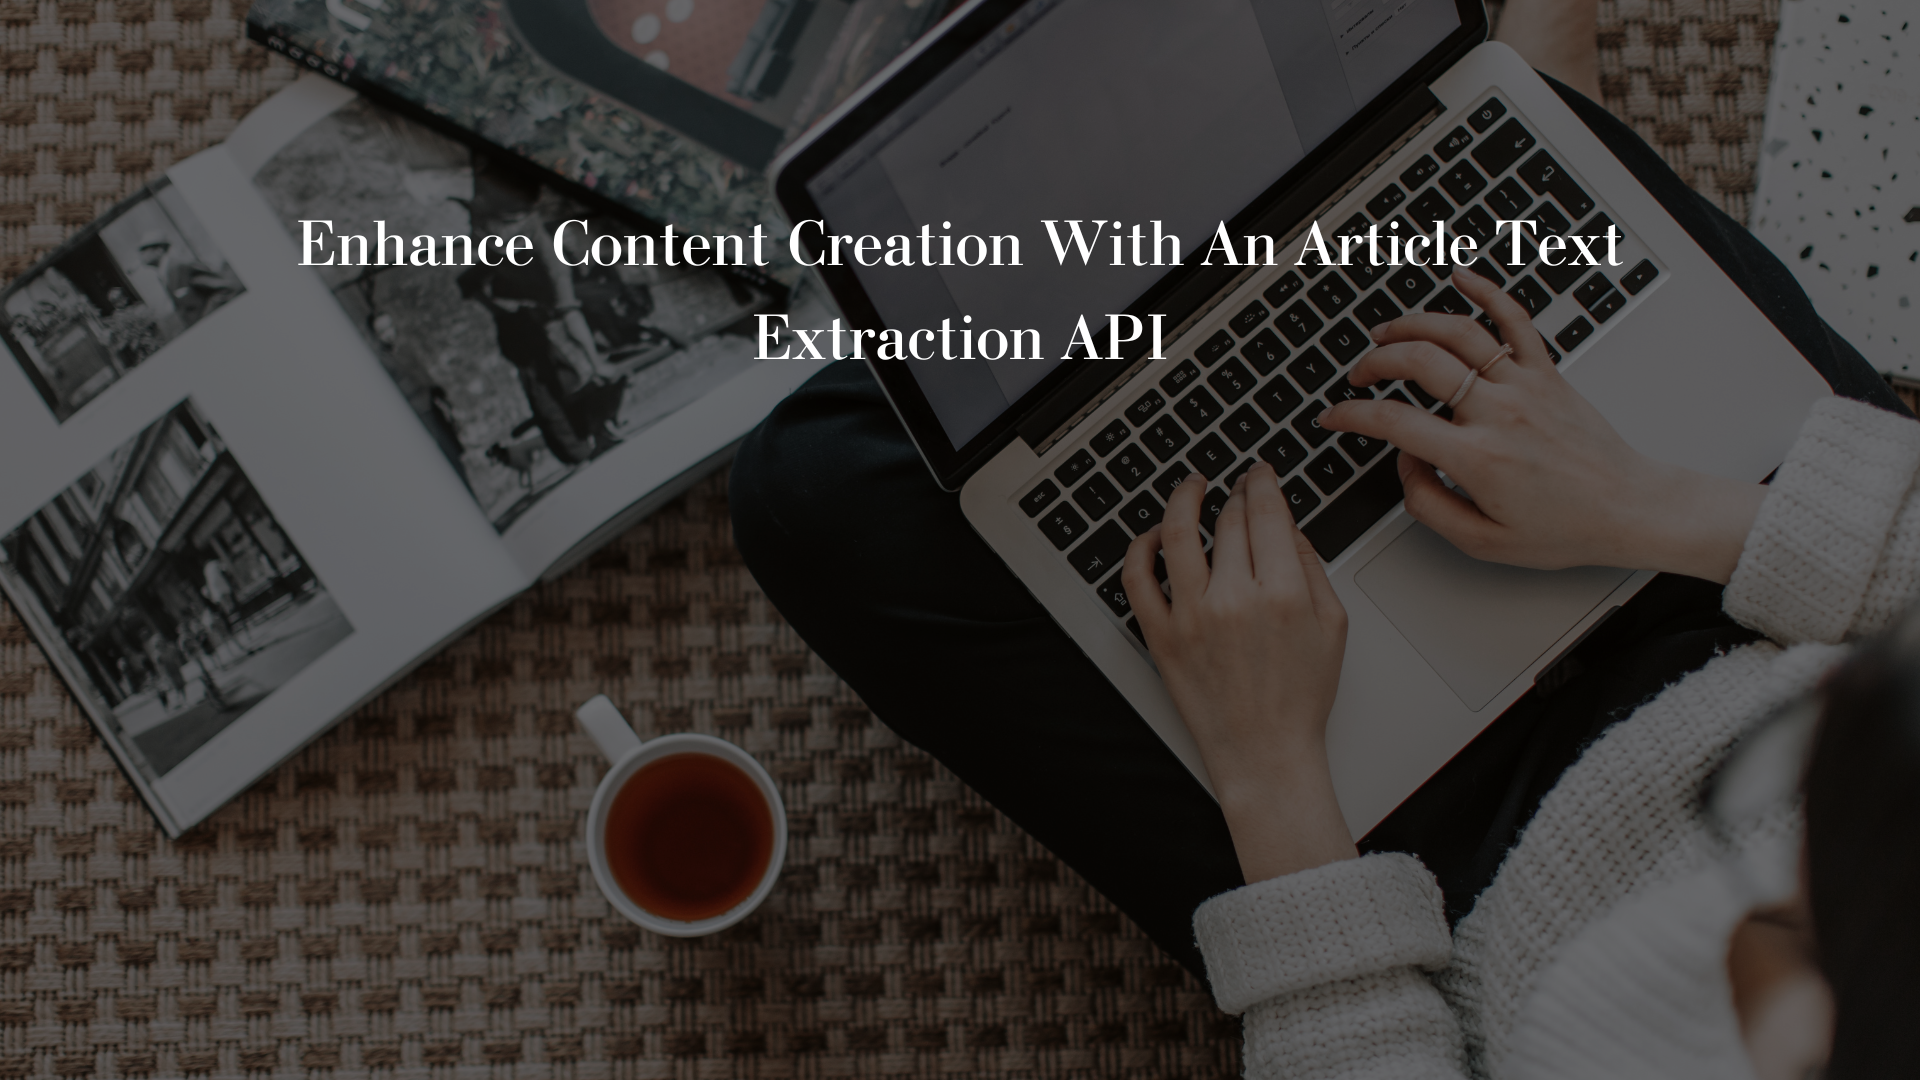 Enhance Content Creation With An Article Text Extraction API